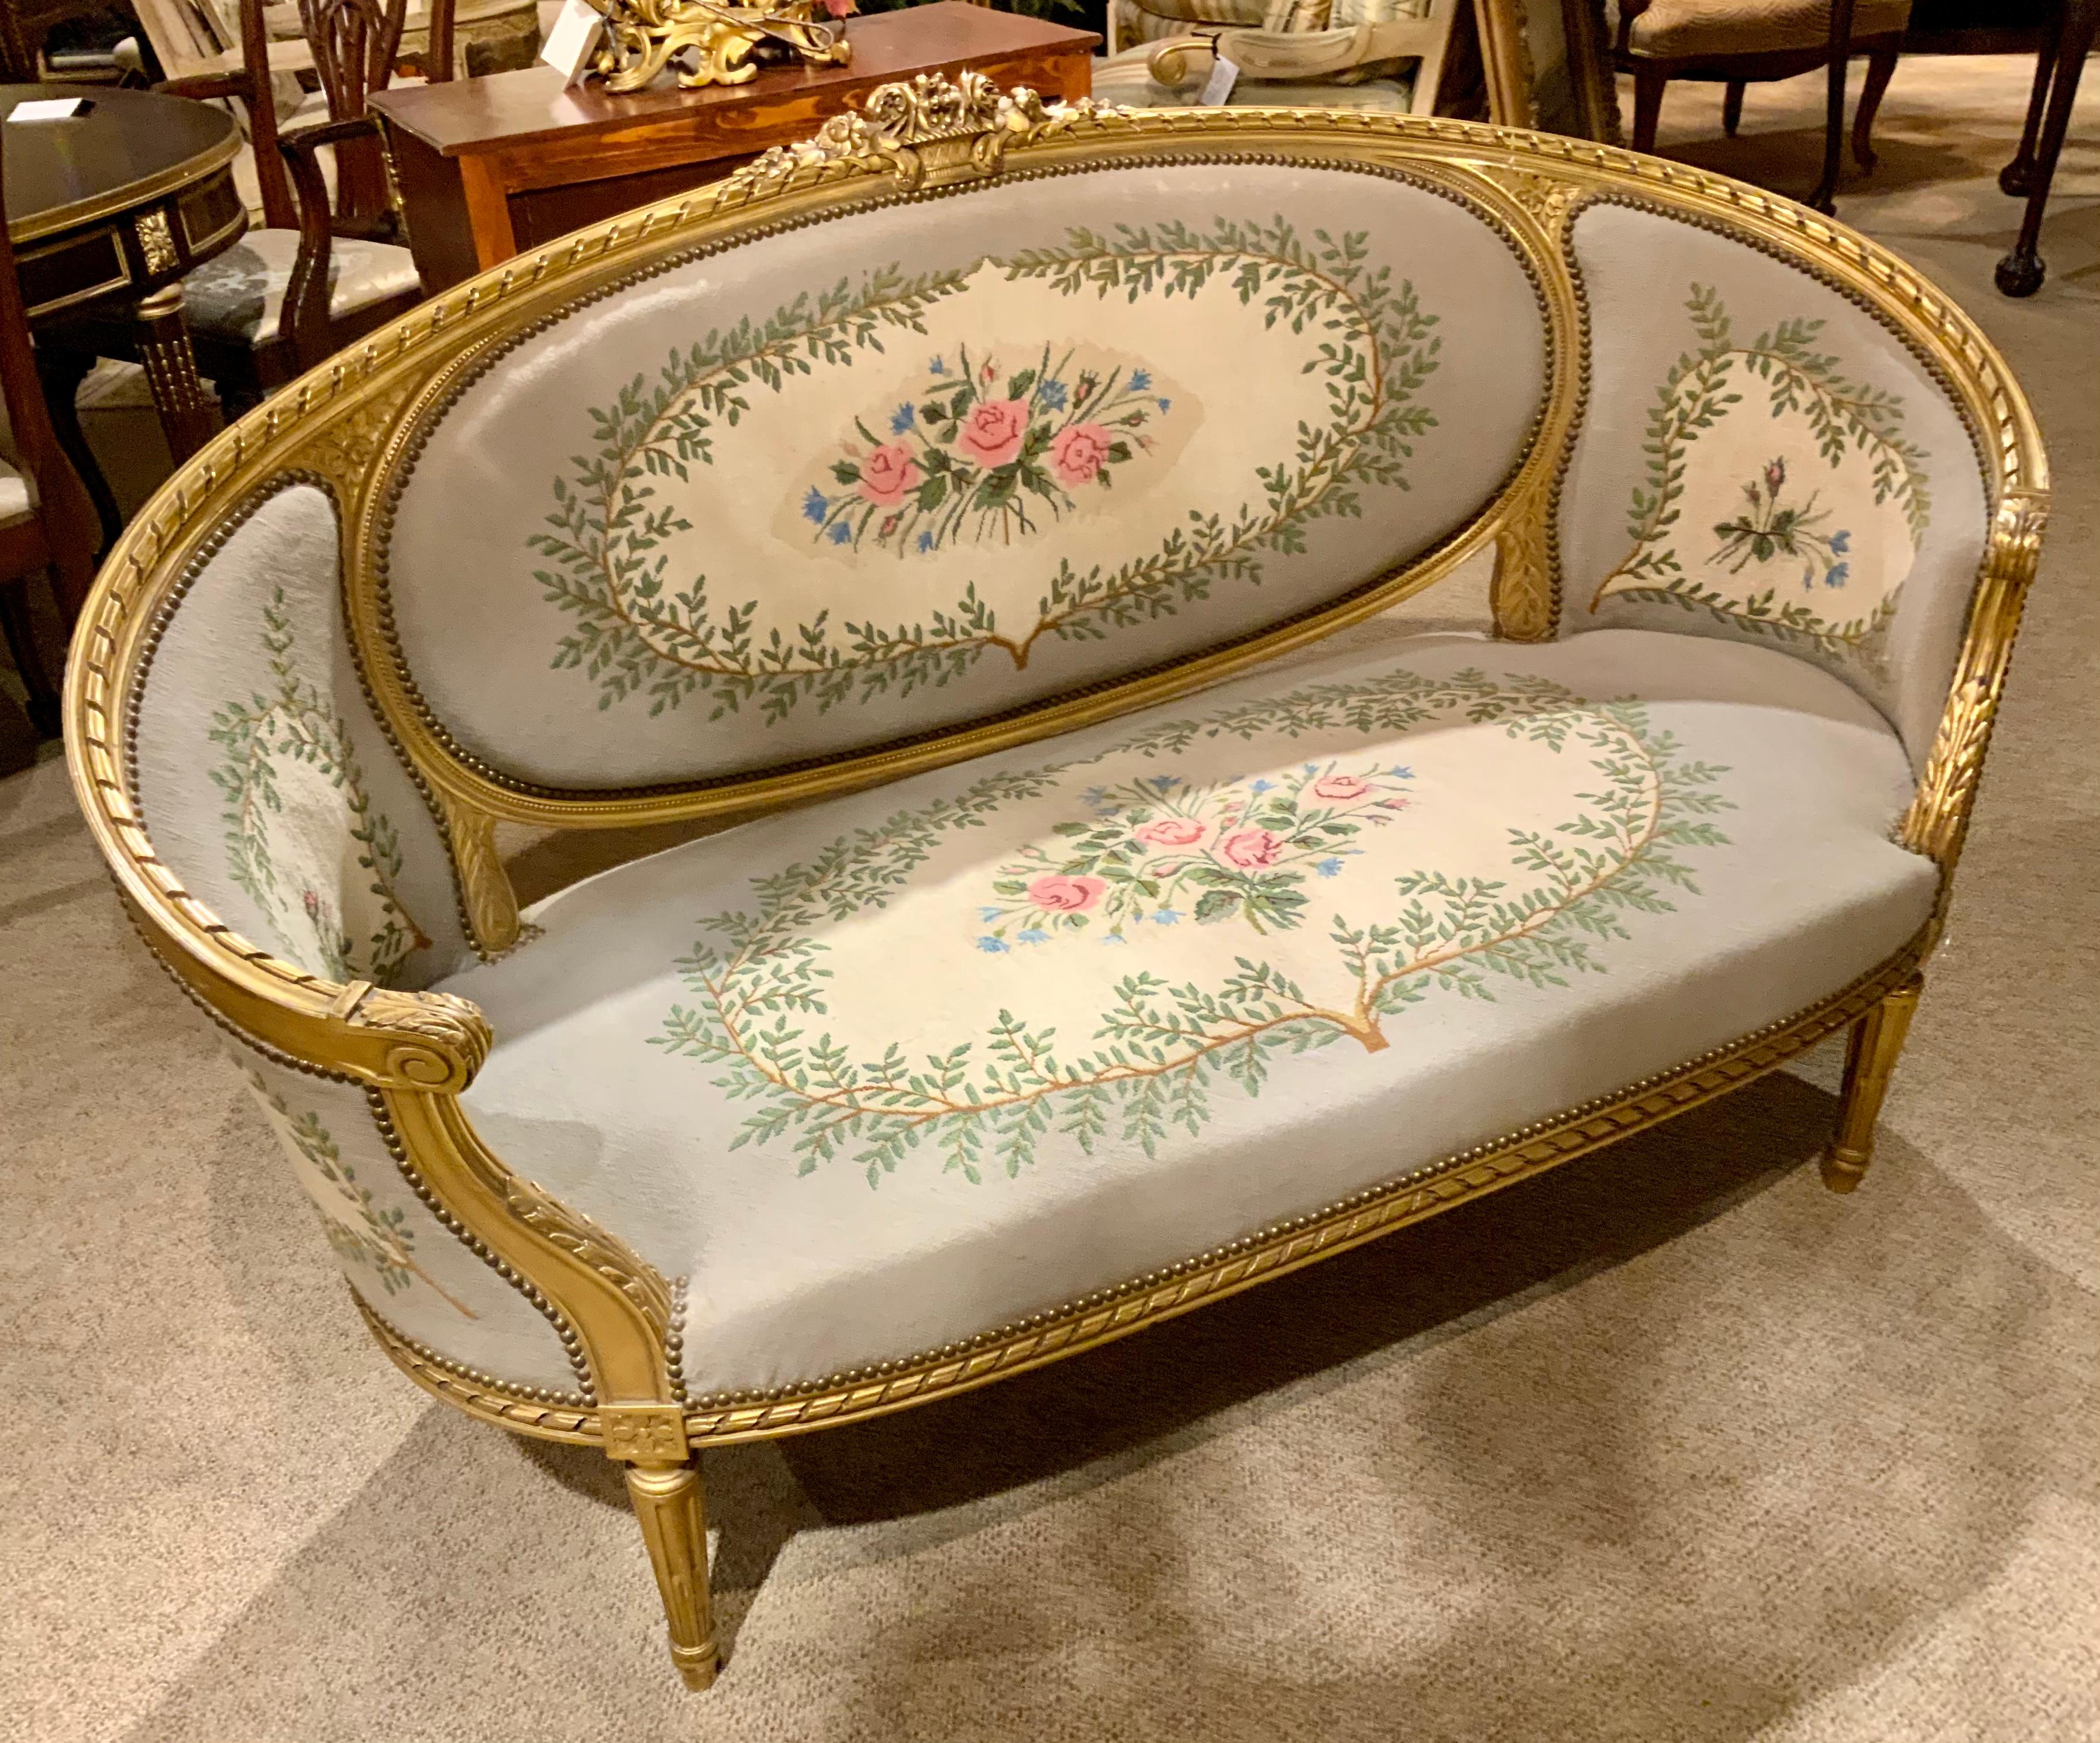 The fine carving and the graceful shape make this canapé especially 
Appealing. The gilding is original and in fine original condition. The
Needle point Upholstrey is in exceptional condition without stains or
Wear. It is comfortable and stable